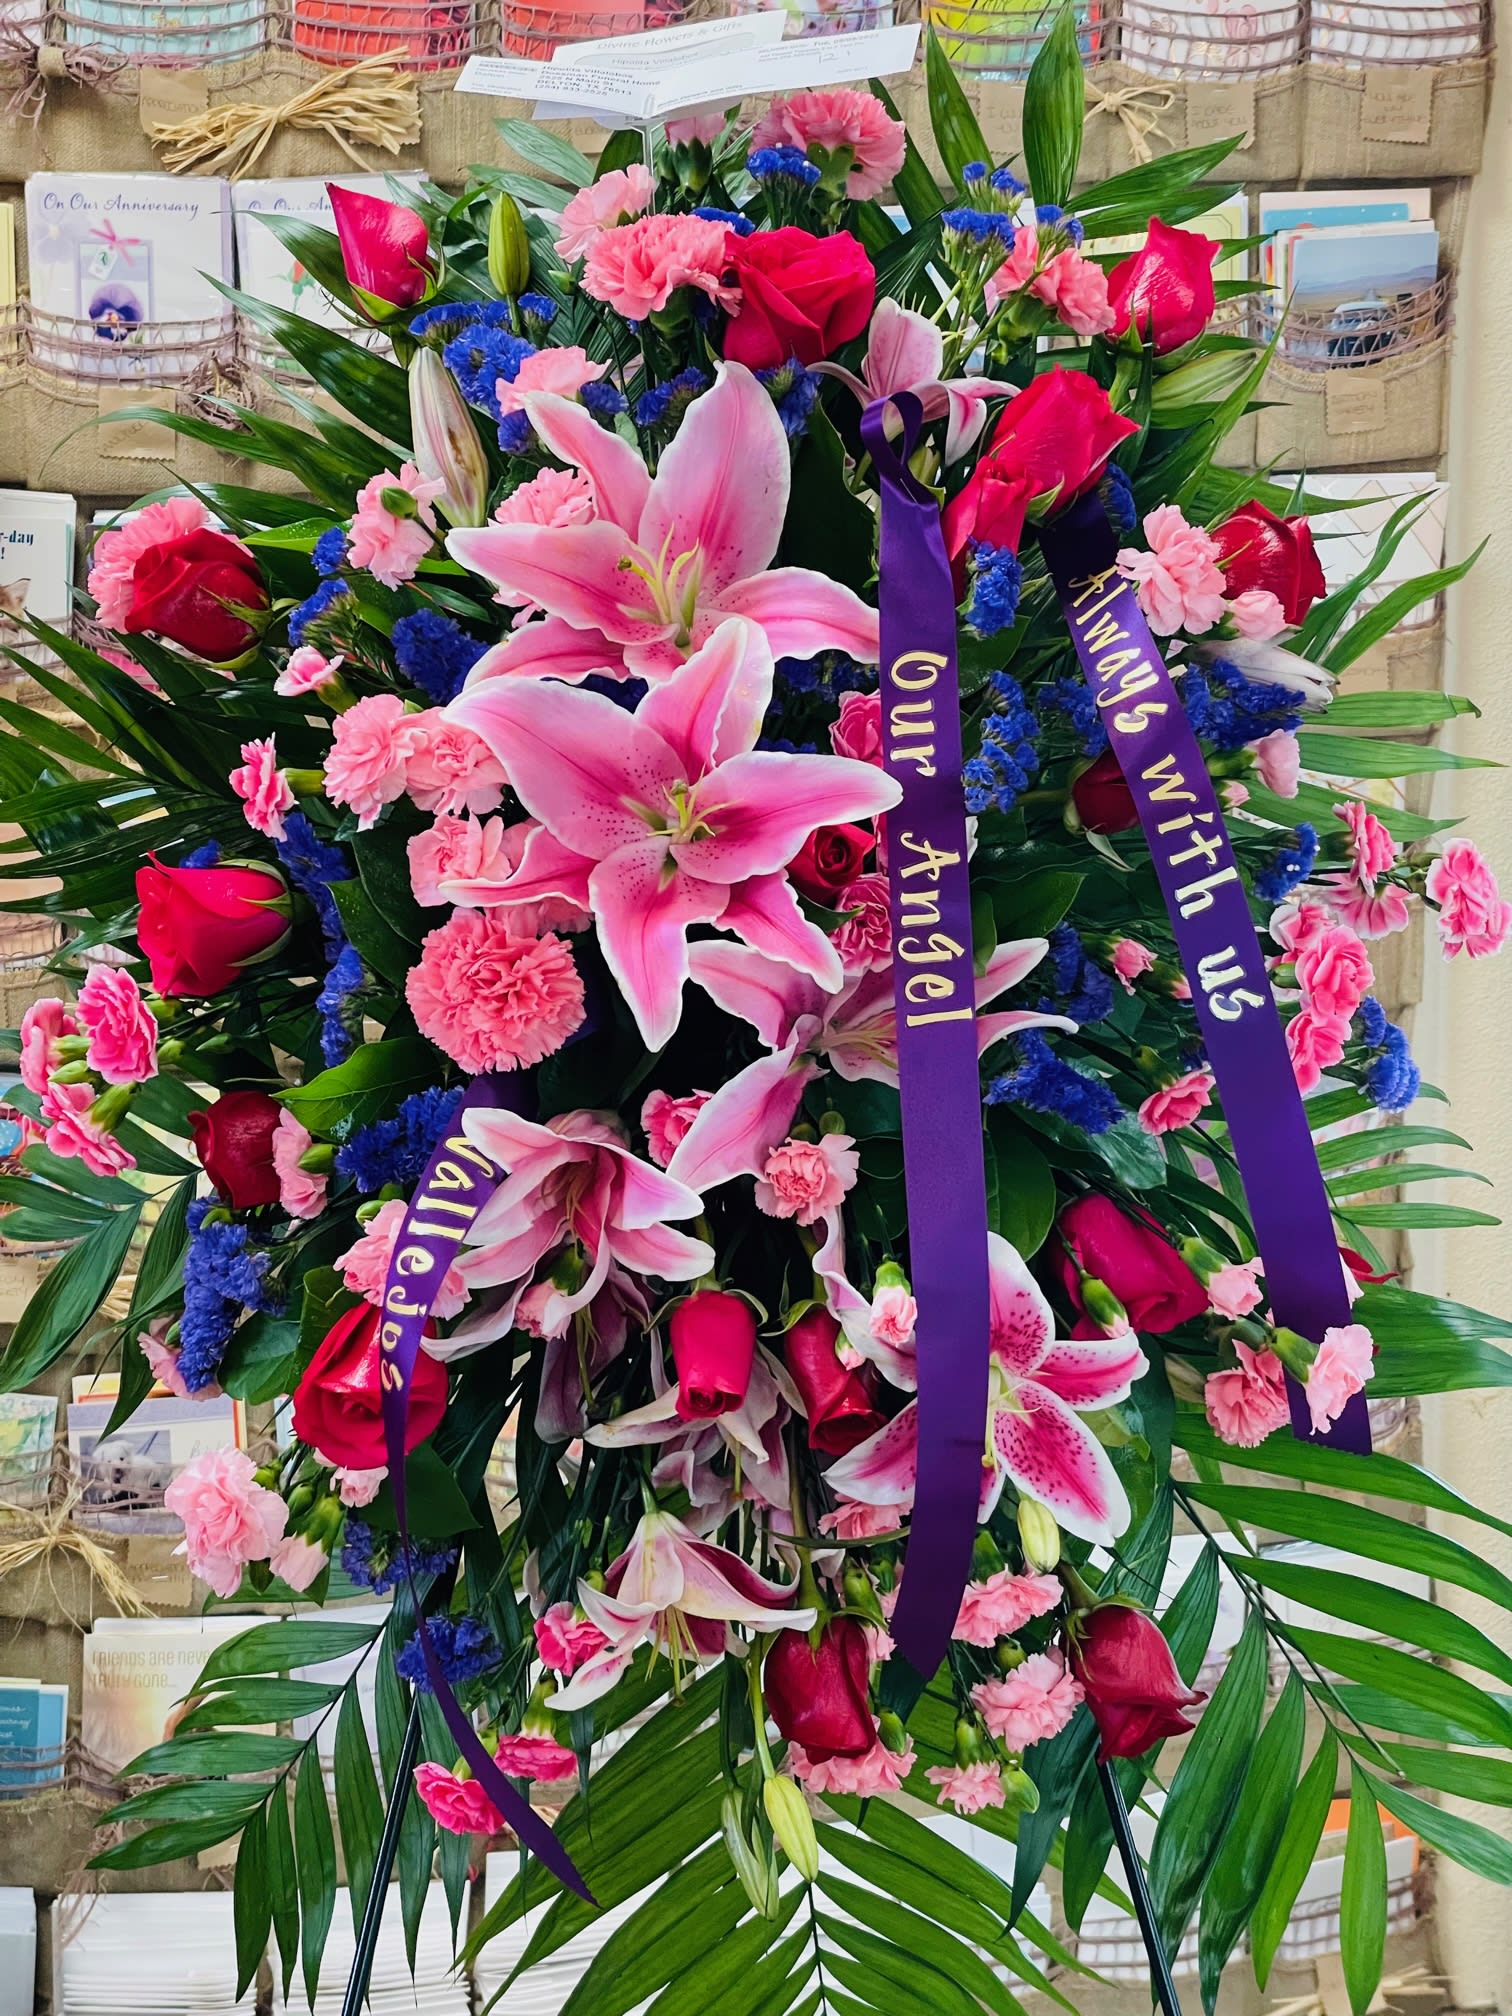 Amethyst Remembrance - This vibrant standing spray shares the warmth and comfort your loved ones need during this difficult time through each blushing bloom. Beautifully combined with vibrant pinks and purples featuring  lilies, spray roses, snapdragons, and assorted greens to express your heartfelt love.